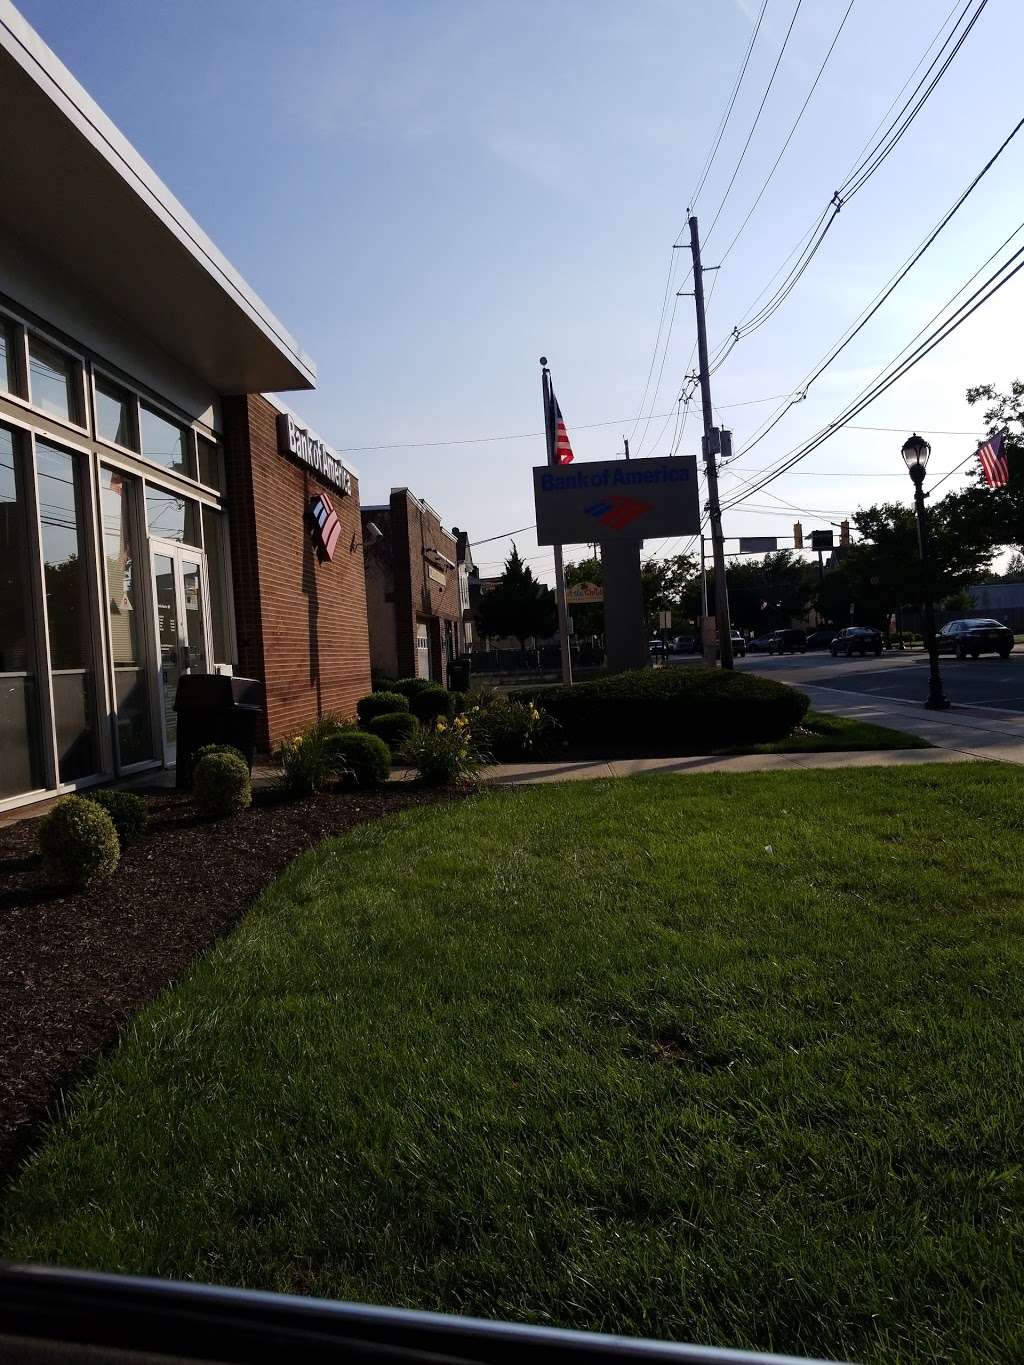 Bank of America ATM | 405 North Ave, Dunellen, NJ 08812, USA | Phone: (800) 622-8731